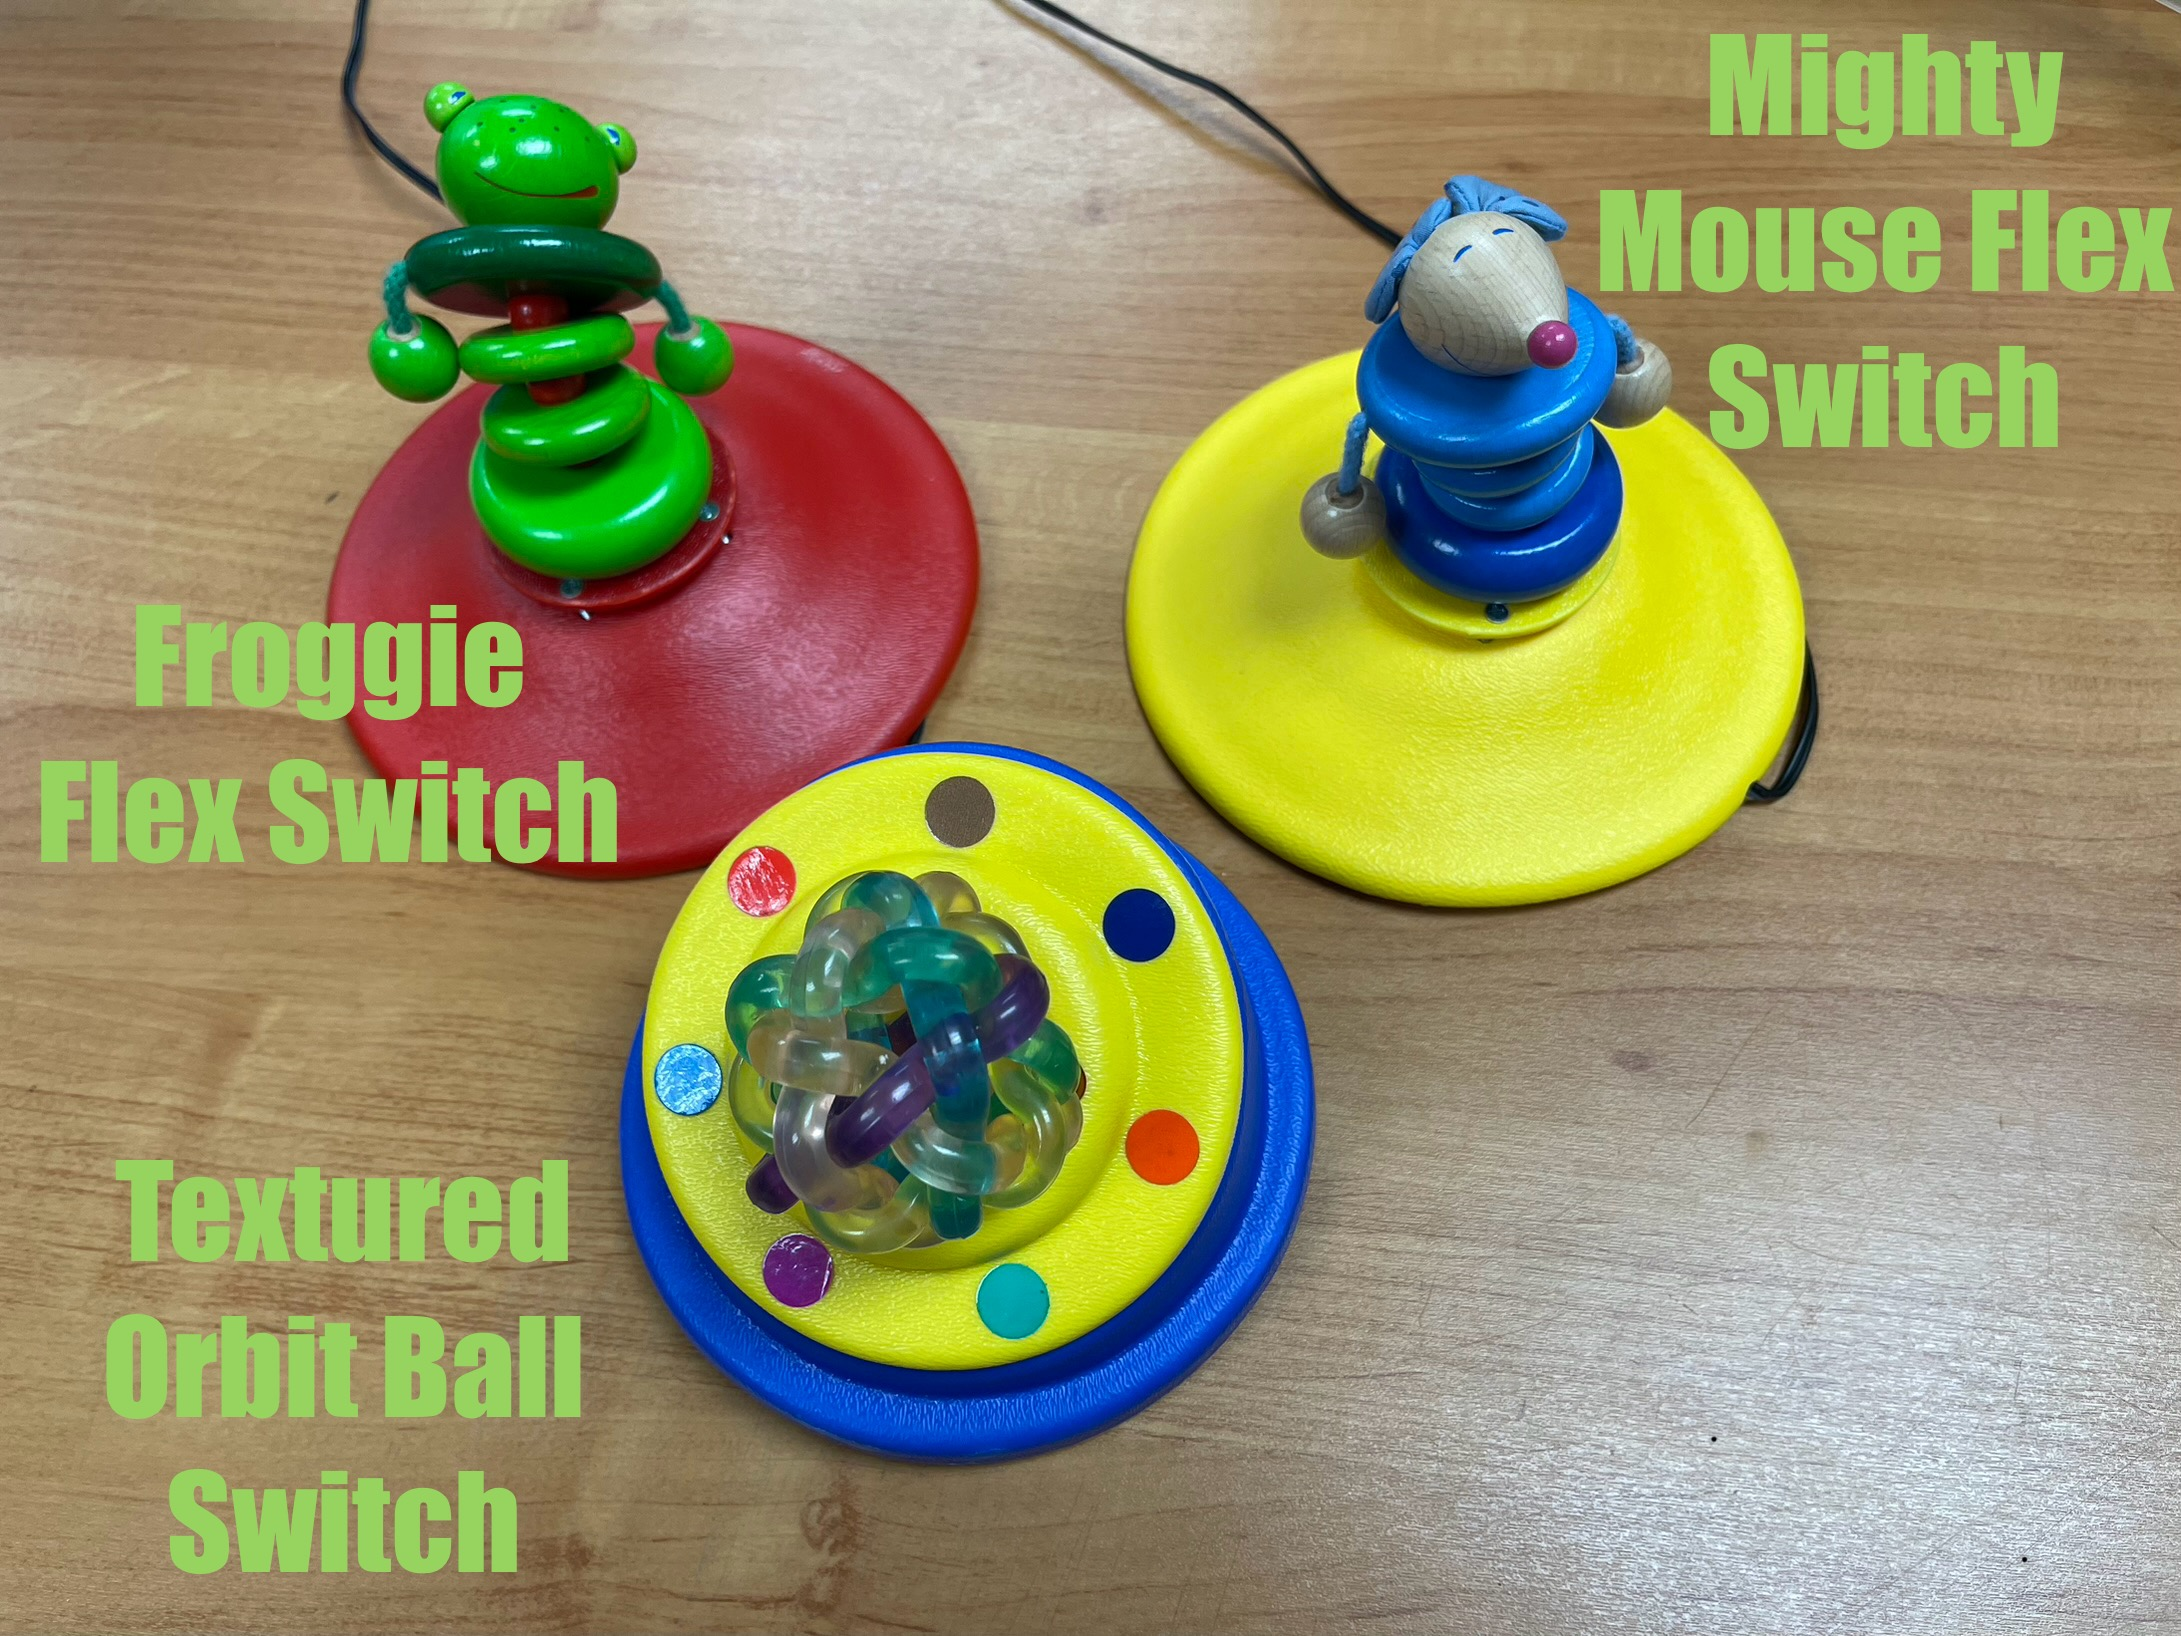 Image of Froogie Switch, Mini mouse switch and textured orbit ball switch